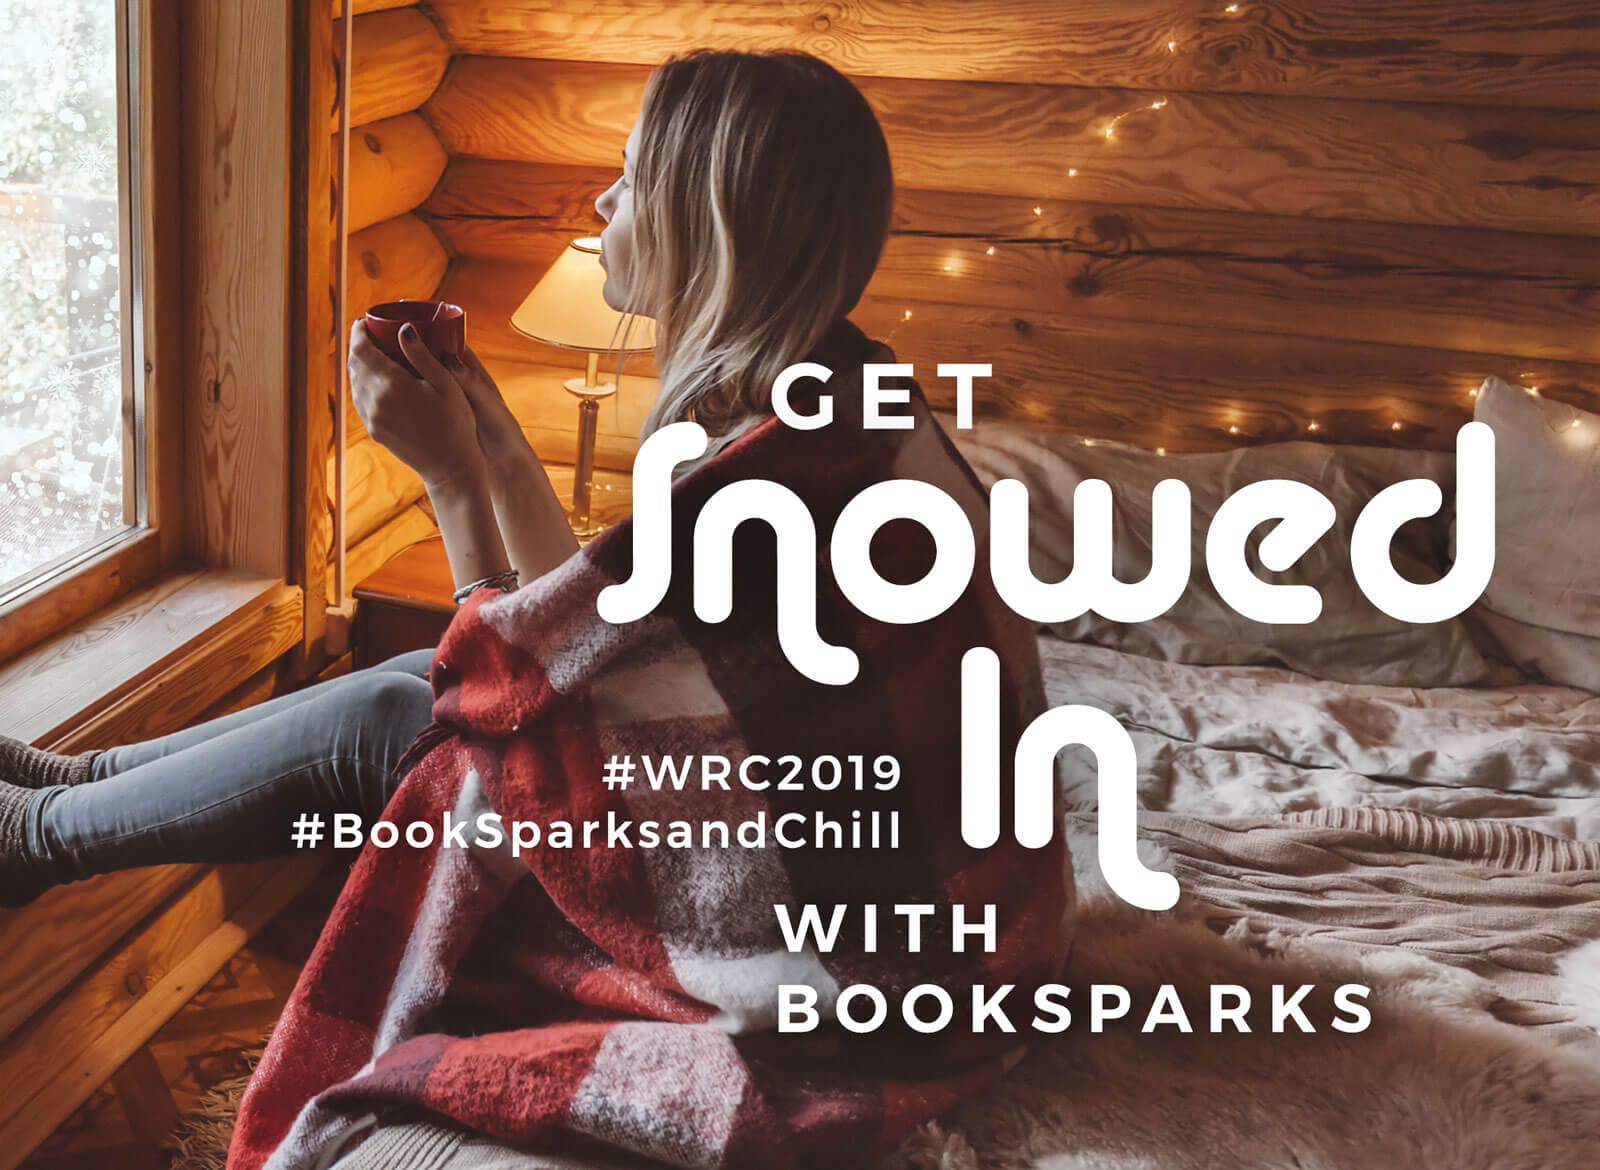 get snowed in with booksparks